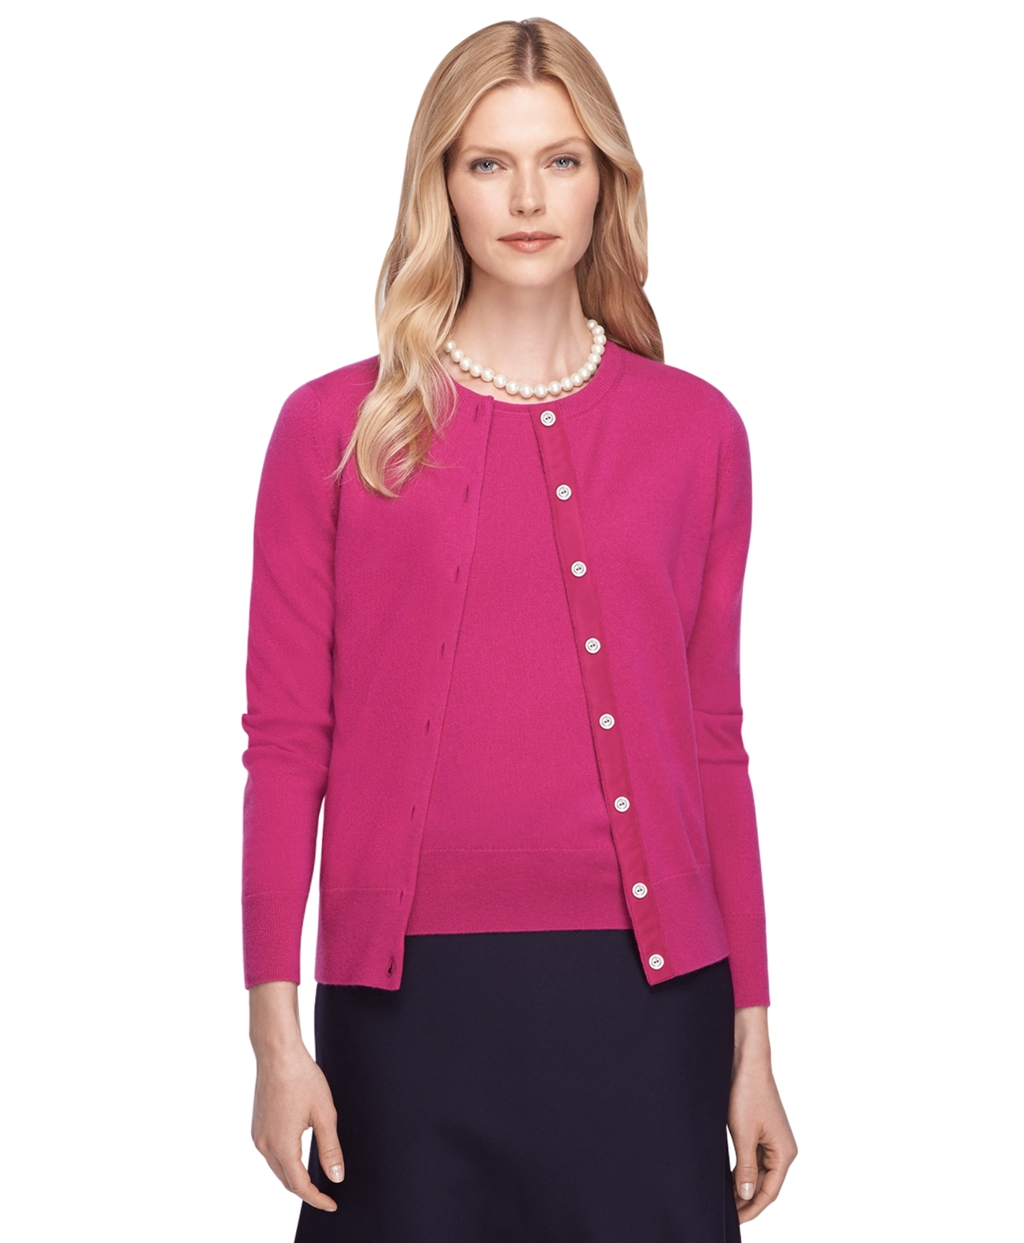 Lyst - Brooks Brothers Cashmere Cardigan in Pink